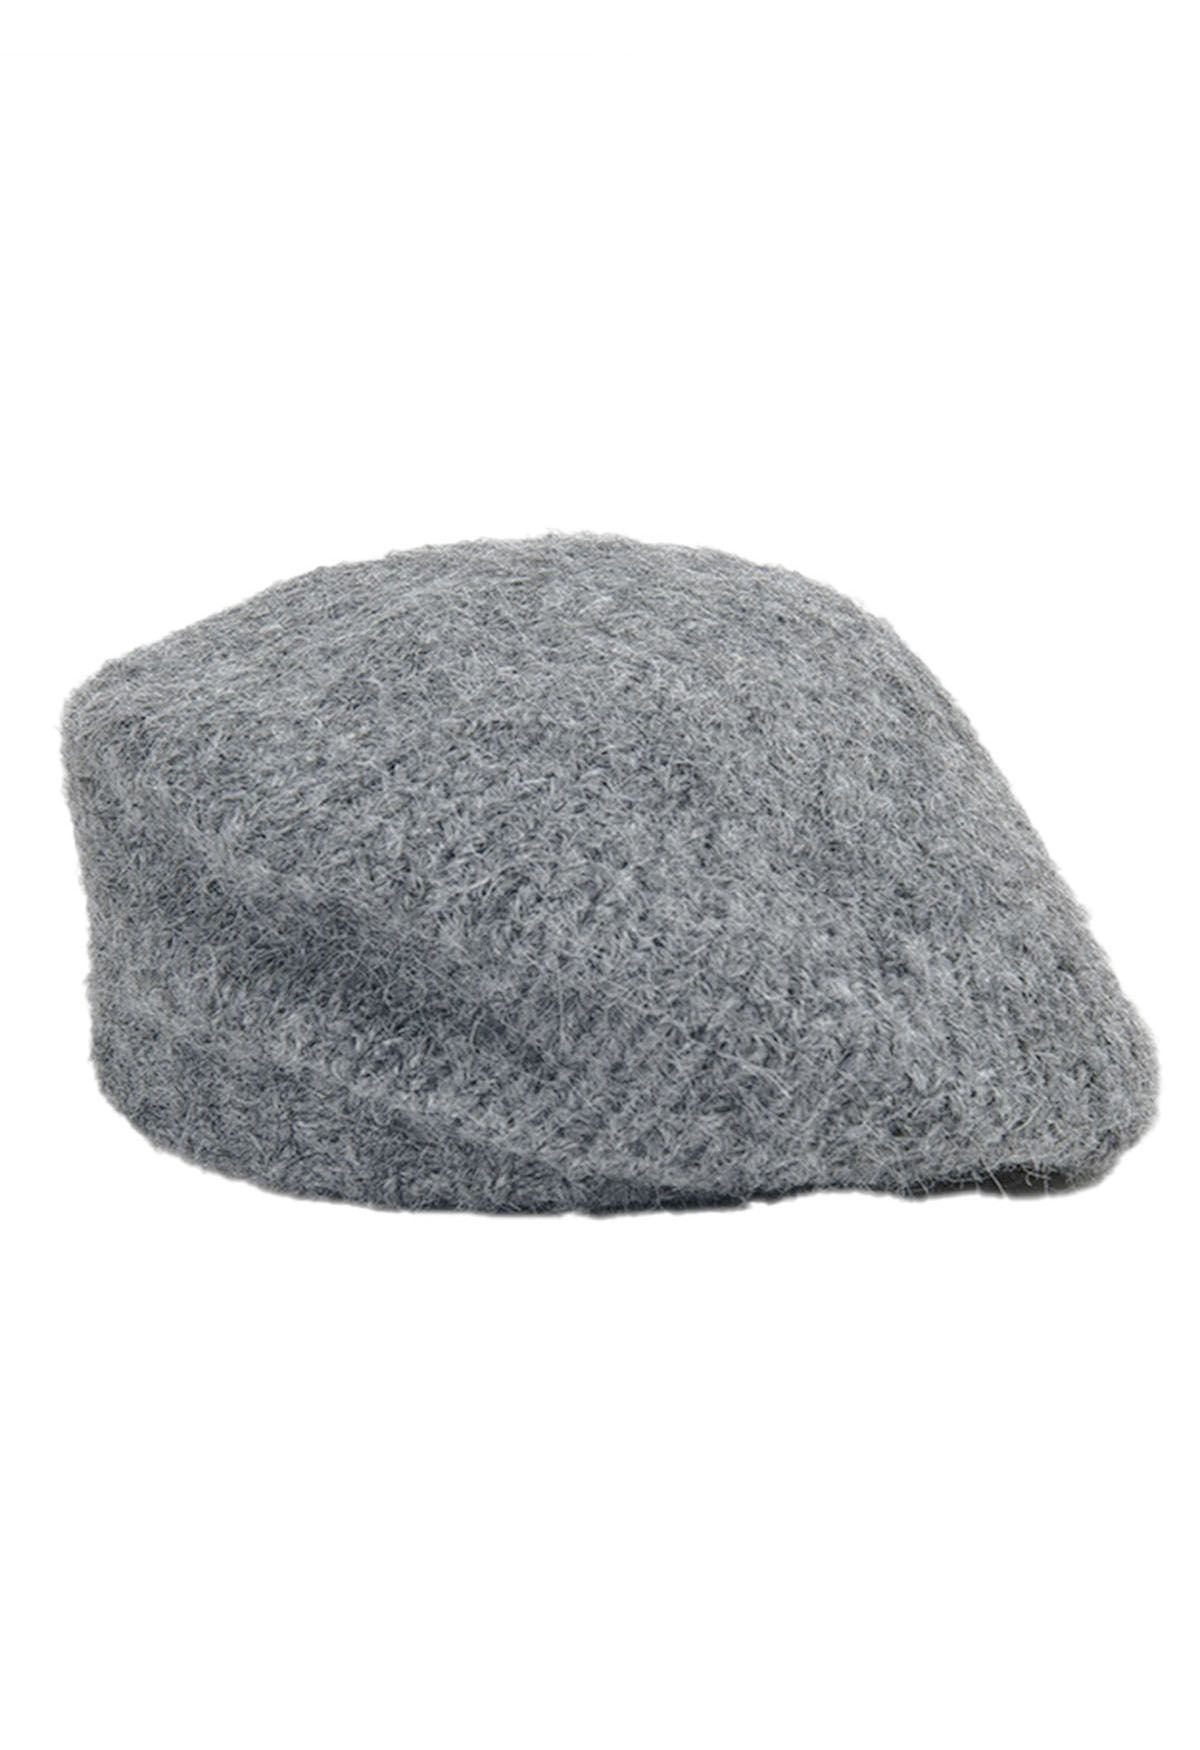 Fuzzy Wool-Blend Beret Hat in Grey - Retro, Indie and Unique Fashion